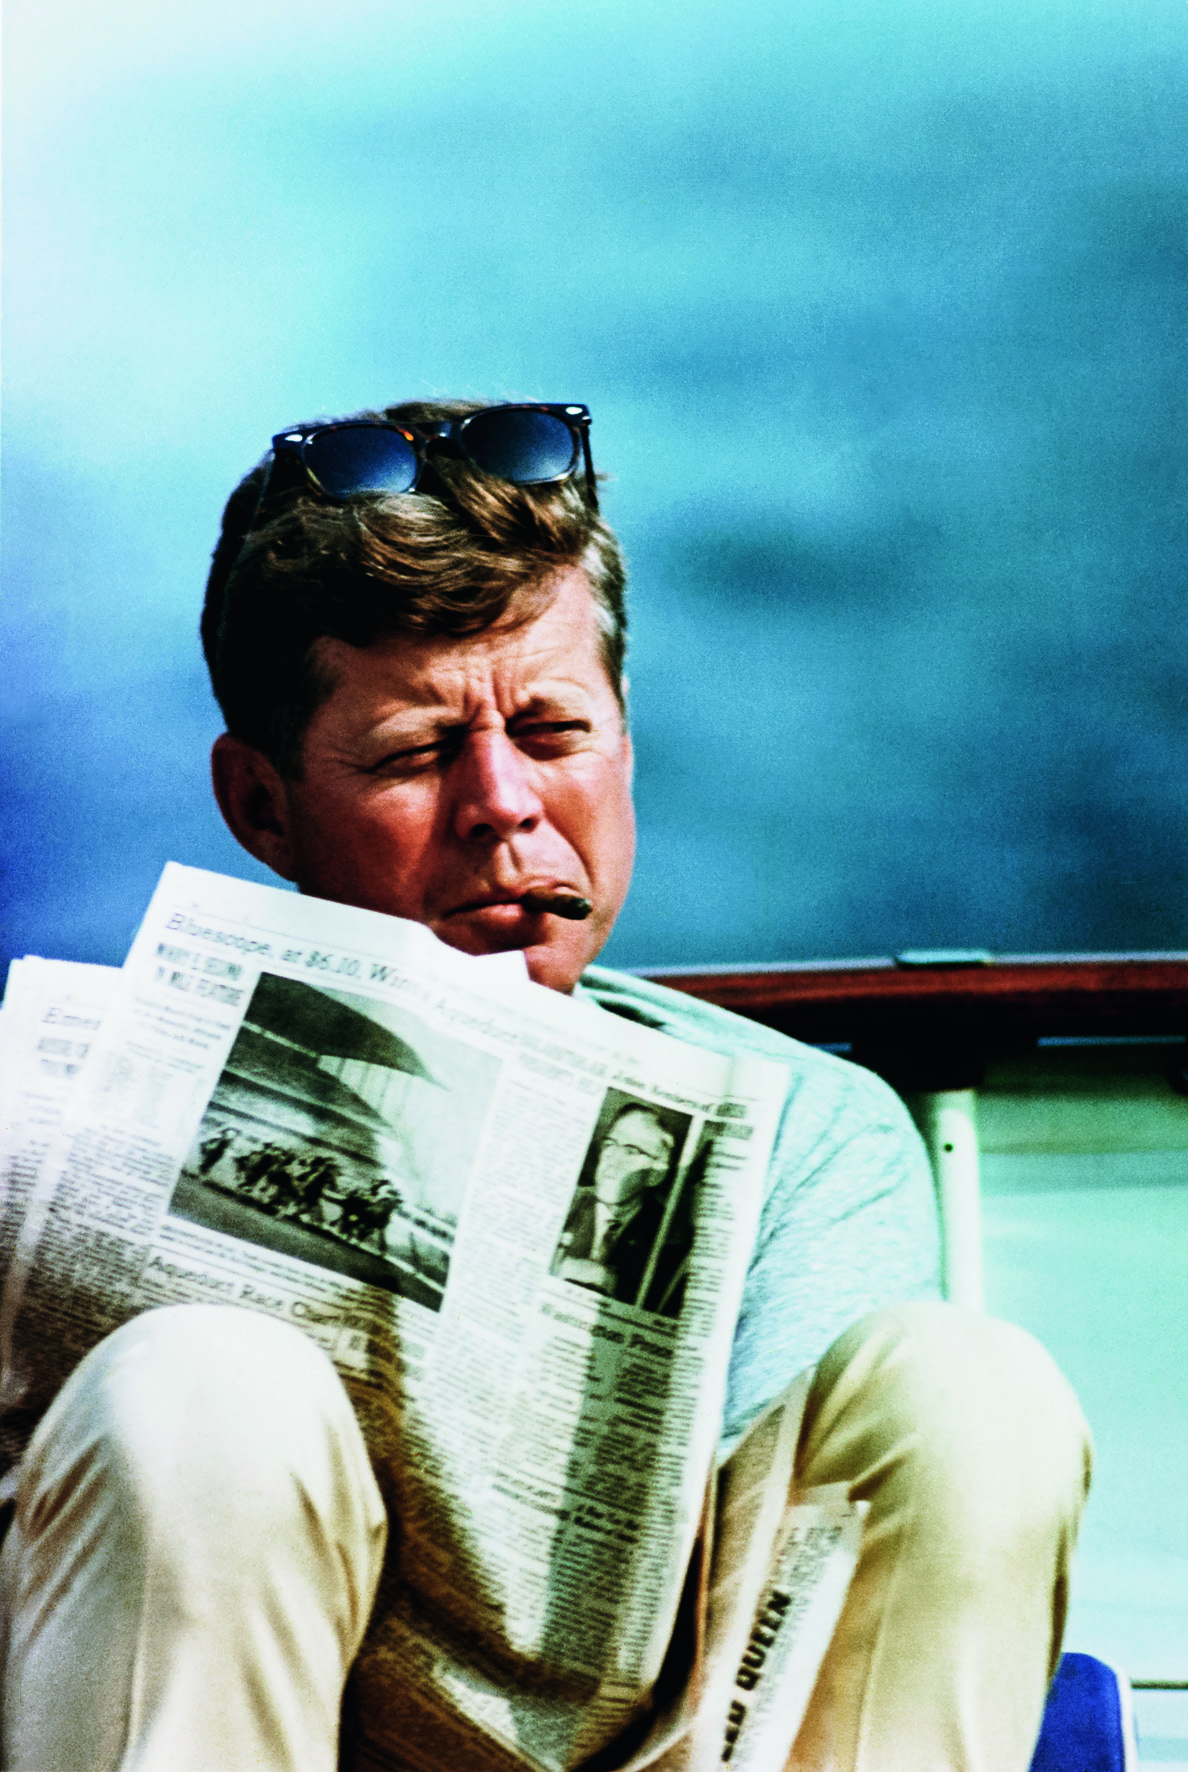   © The Stylish Life - Yachting, published by teNeues, www.teneues.com. John F. Kennedy with Newspaper and Cigar, Photo © CORBIS.  